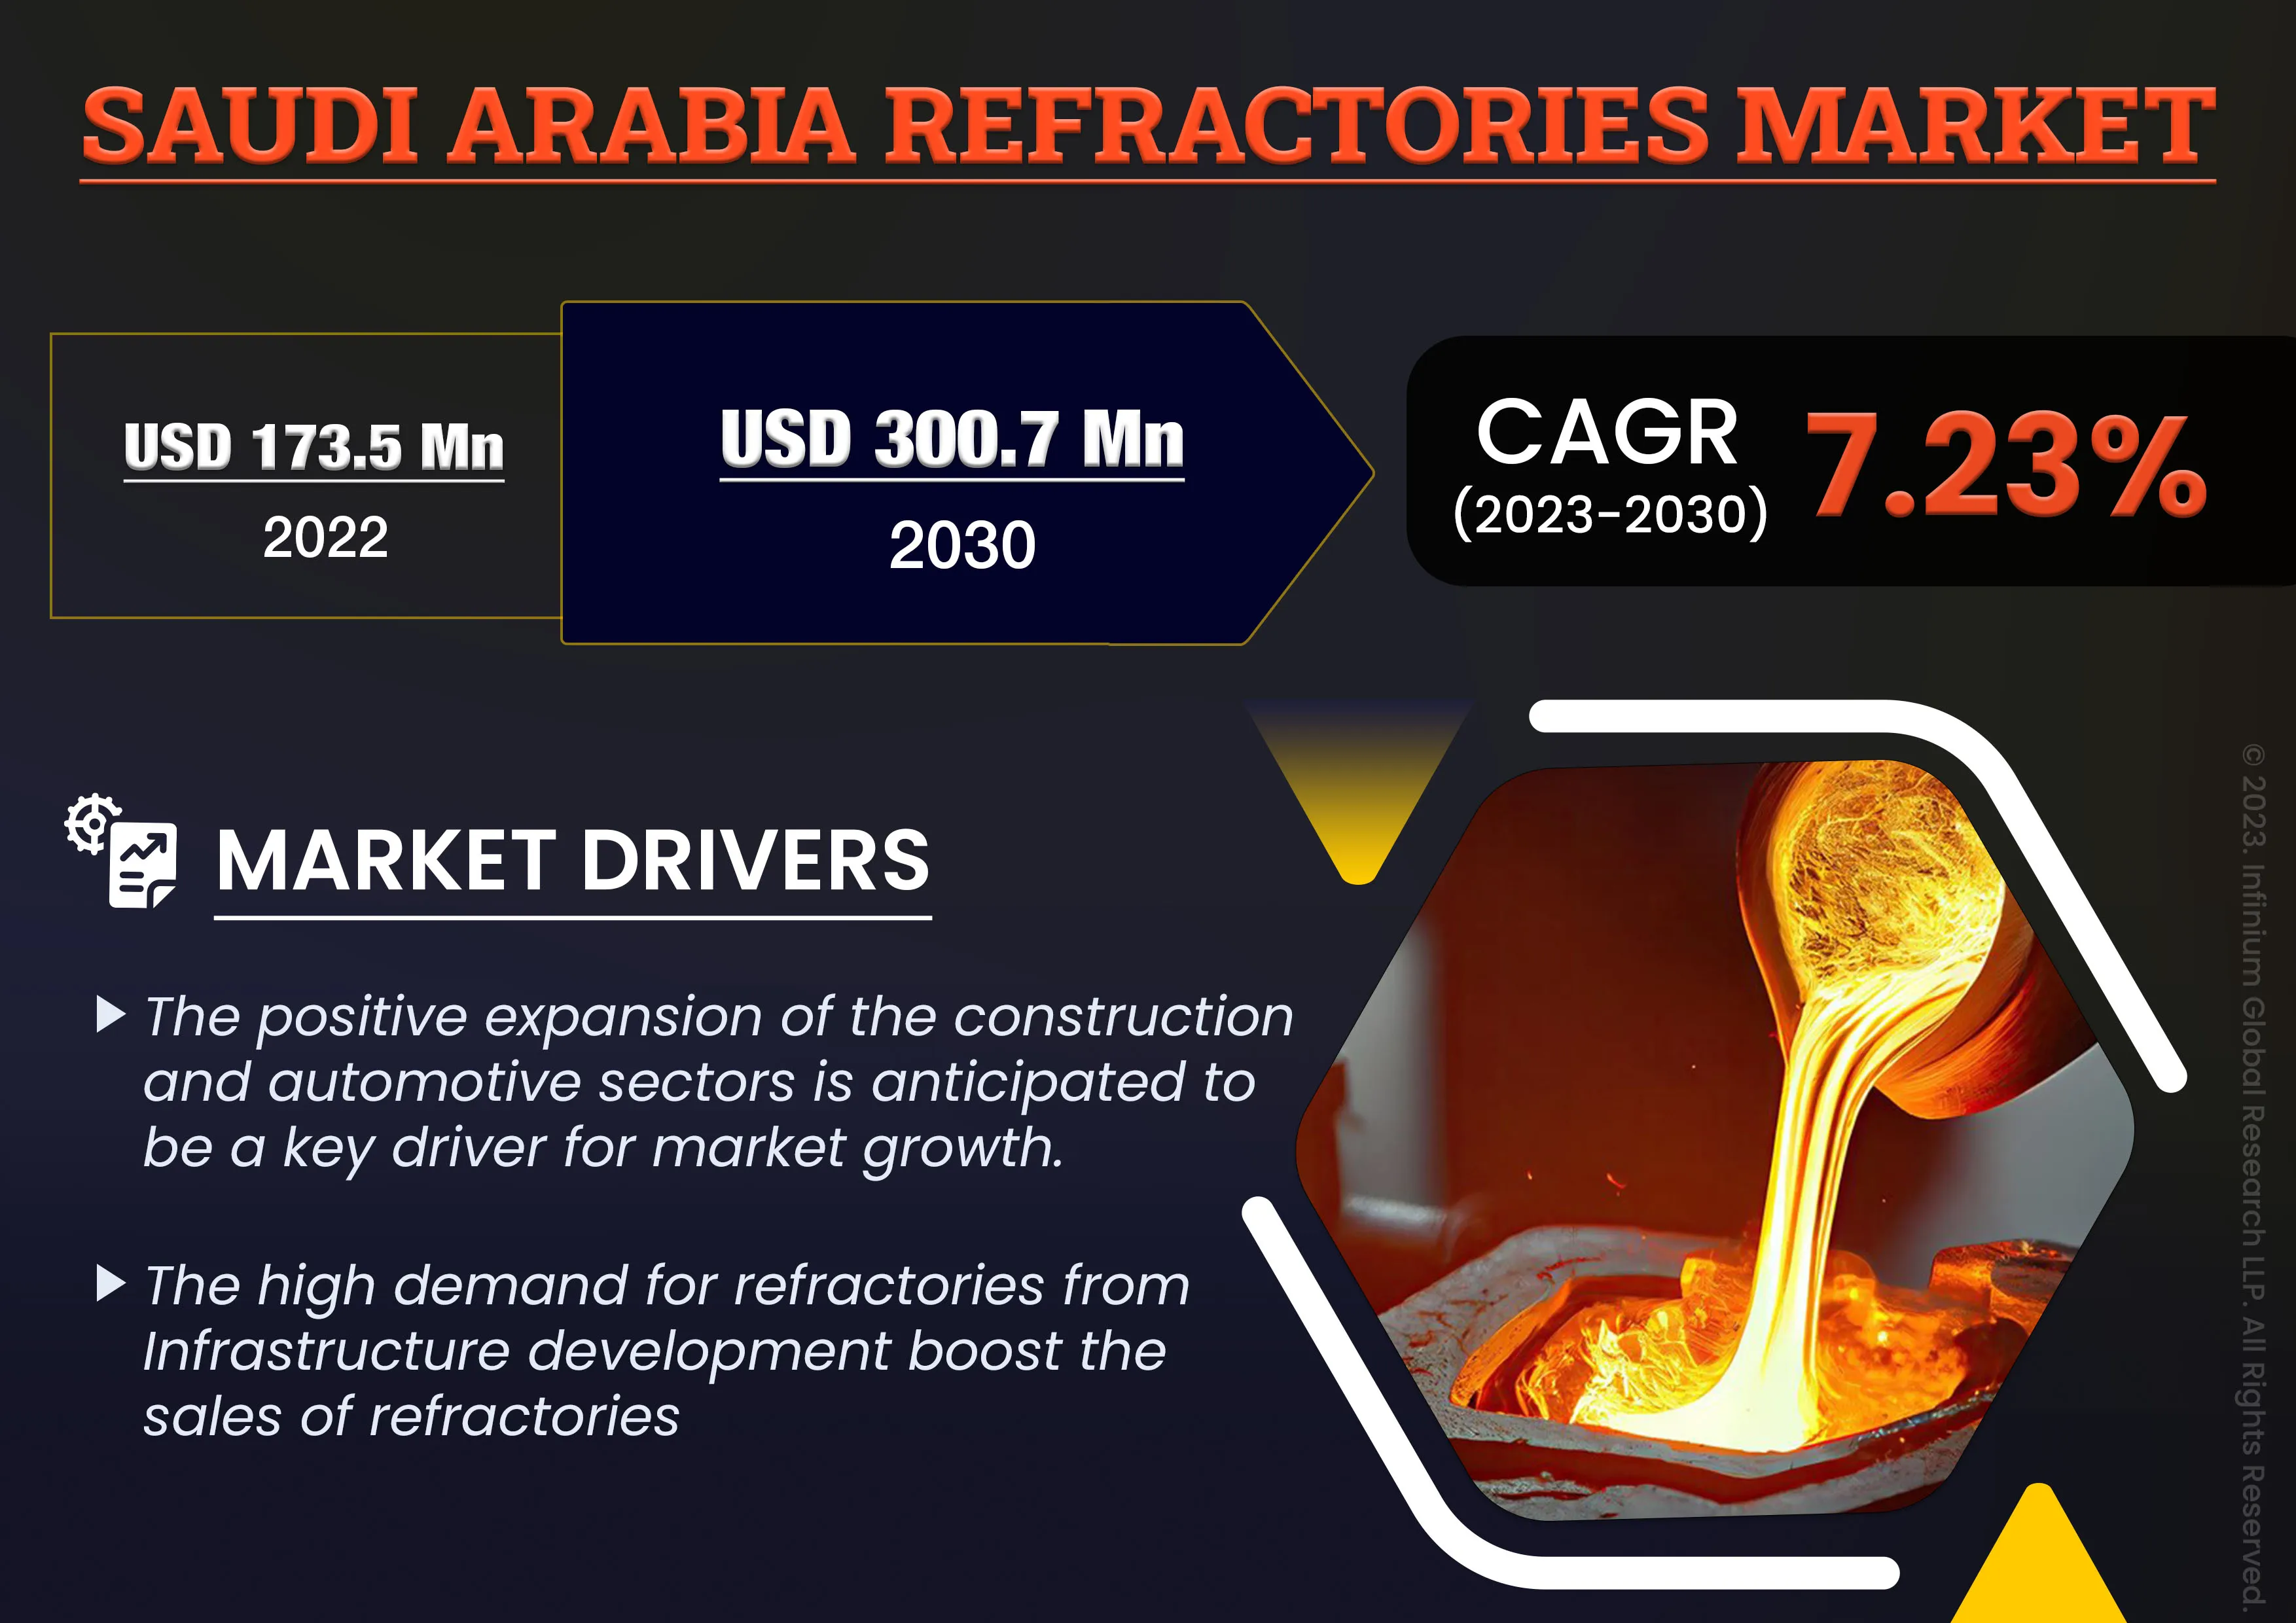 Saudi Arabia Refractories Market was Valued at USD 173.5 Million in 2022 and is Expected to Reach USD 300.7 Million by 2030 and Grow at a CAGR of 7.23% Over the Forecast Period.